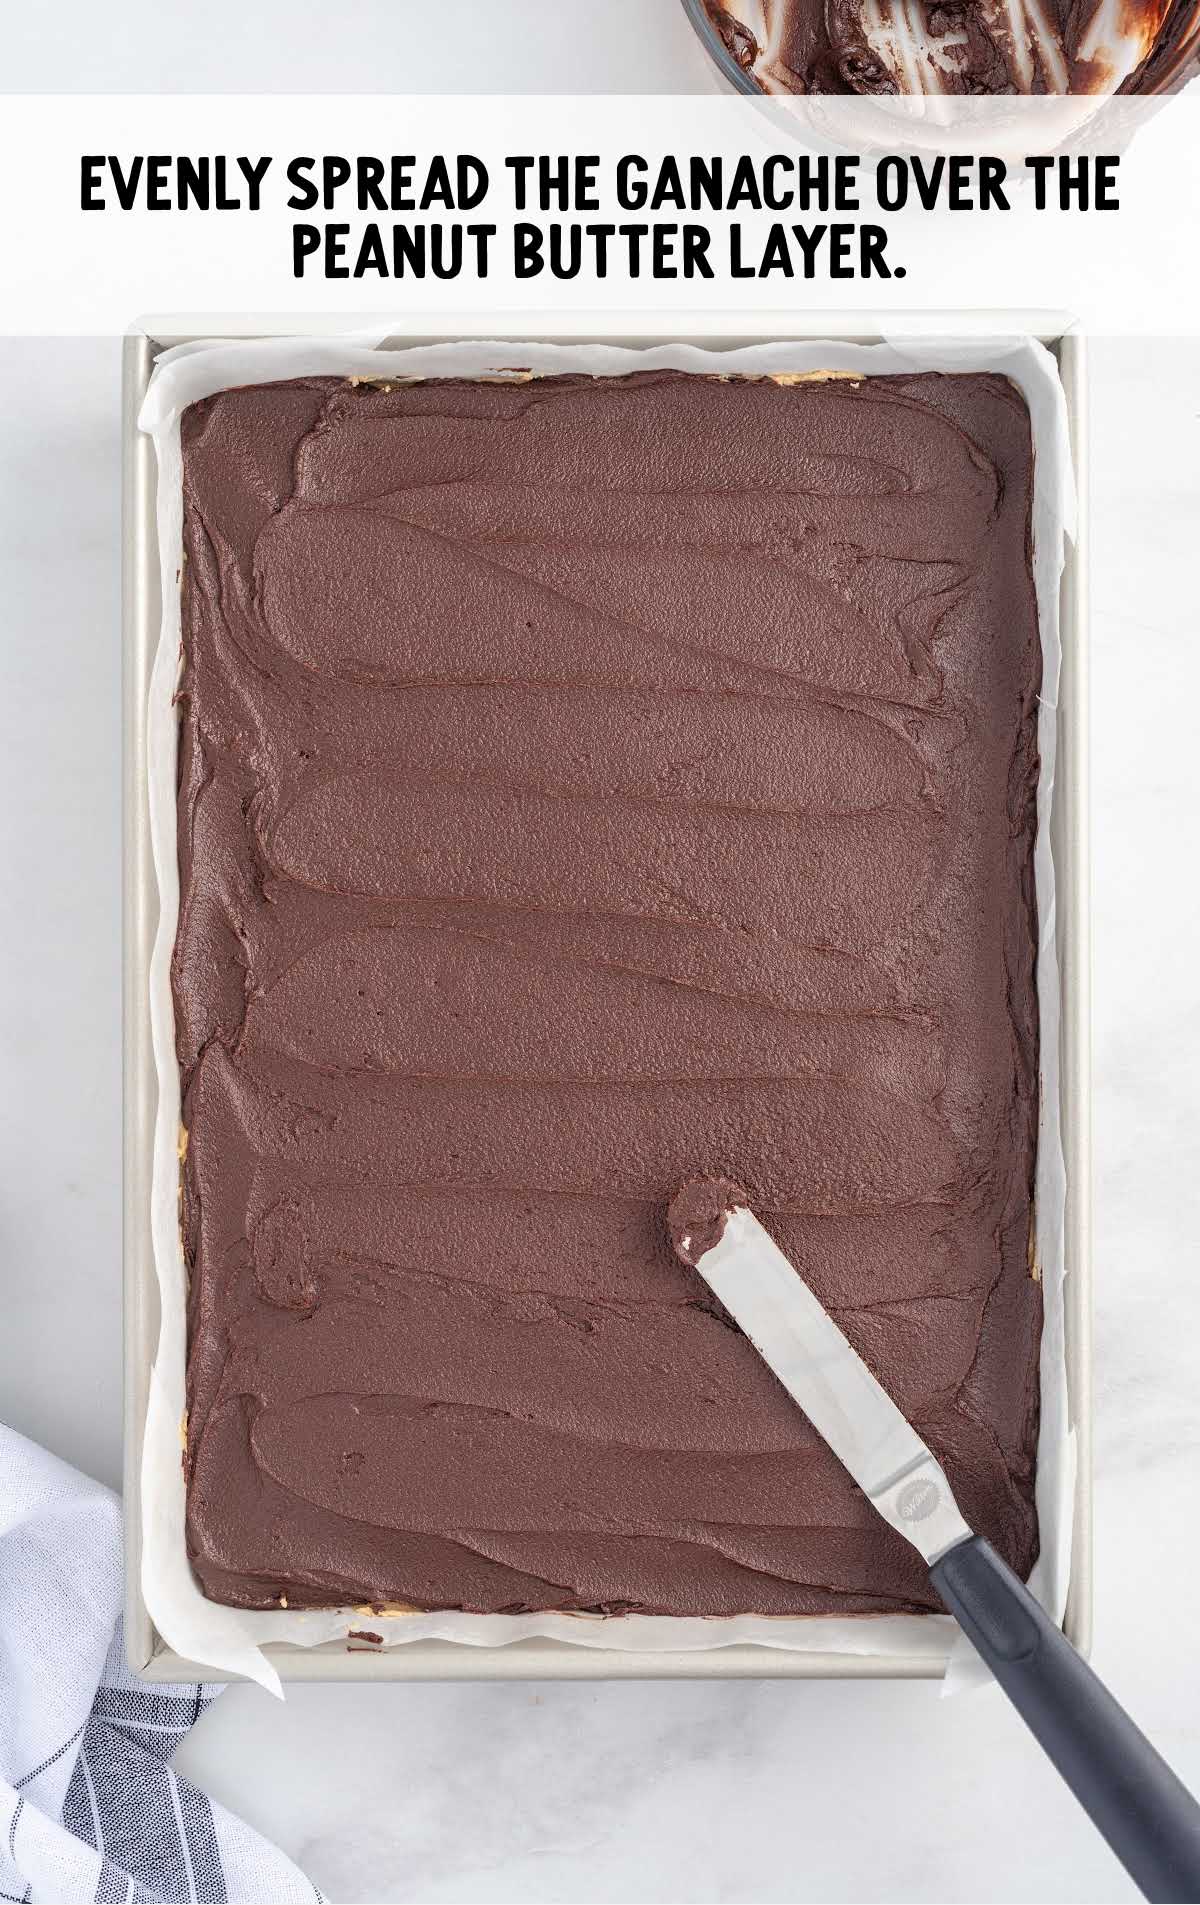 chocolate ganache spread over the peanut butter layer in a baking dish